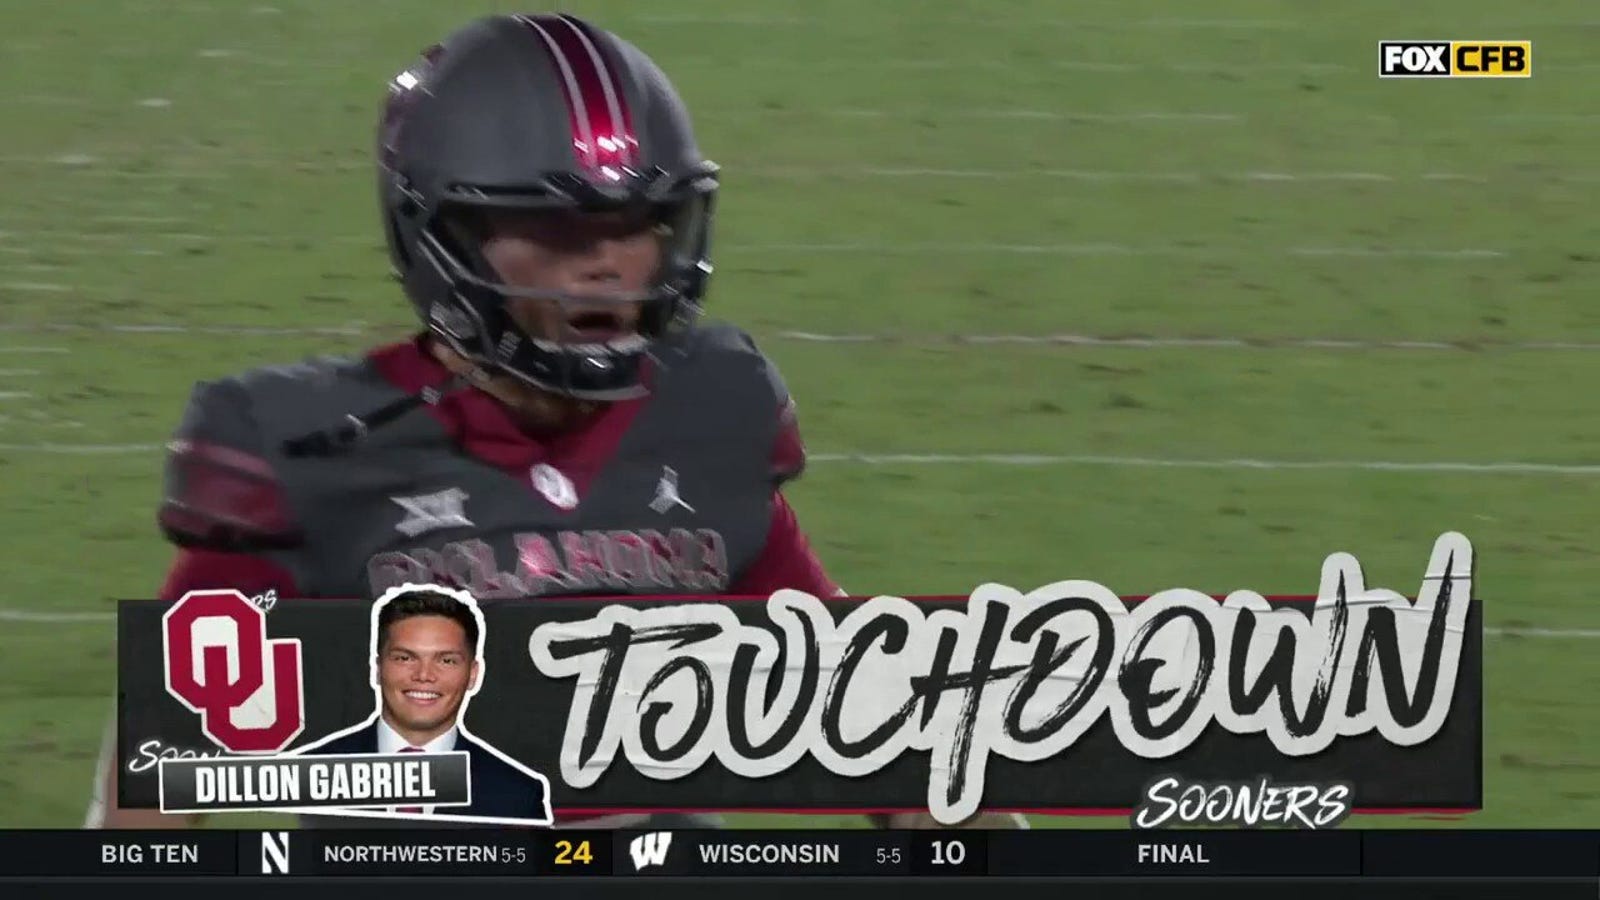 Dillon Gabriel keeps it and punches it in for his second rushing TD, giving Oklahoma the lead